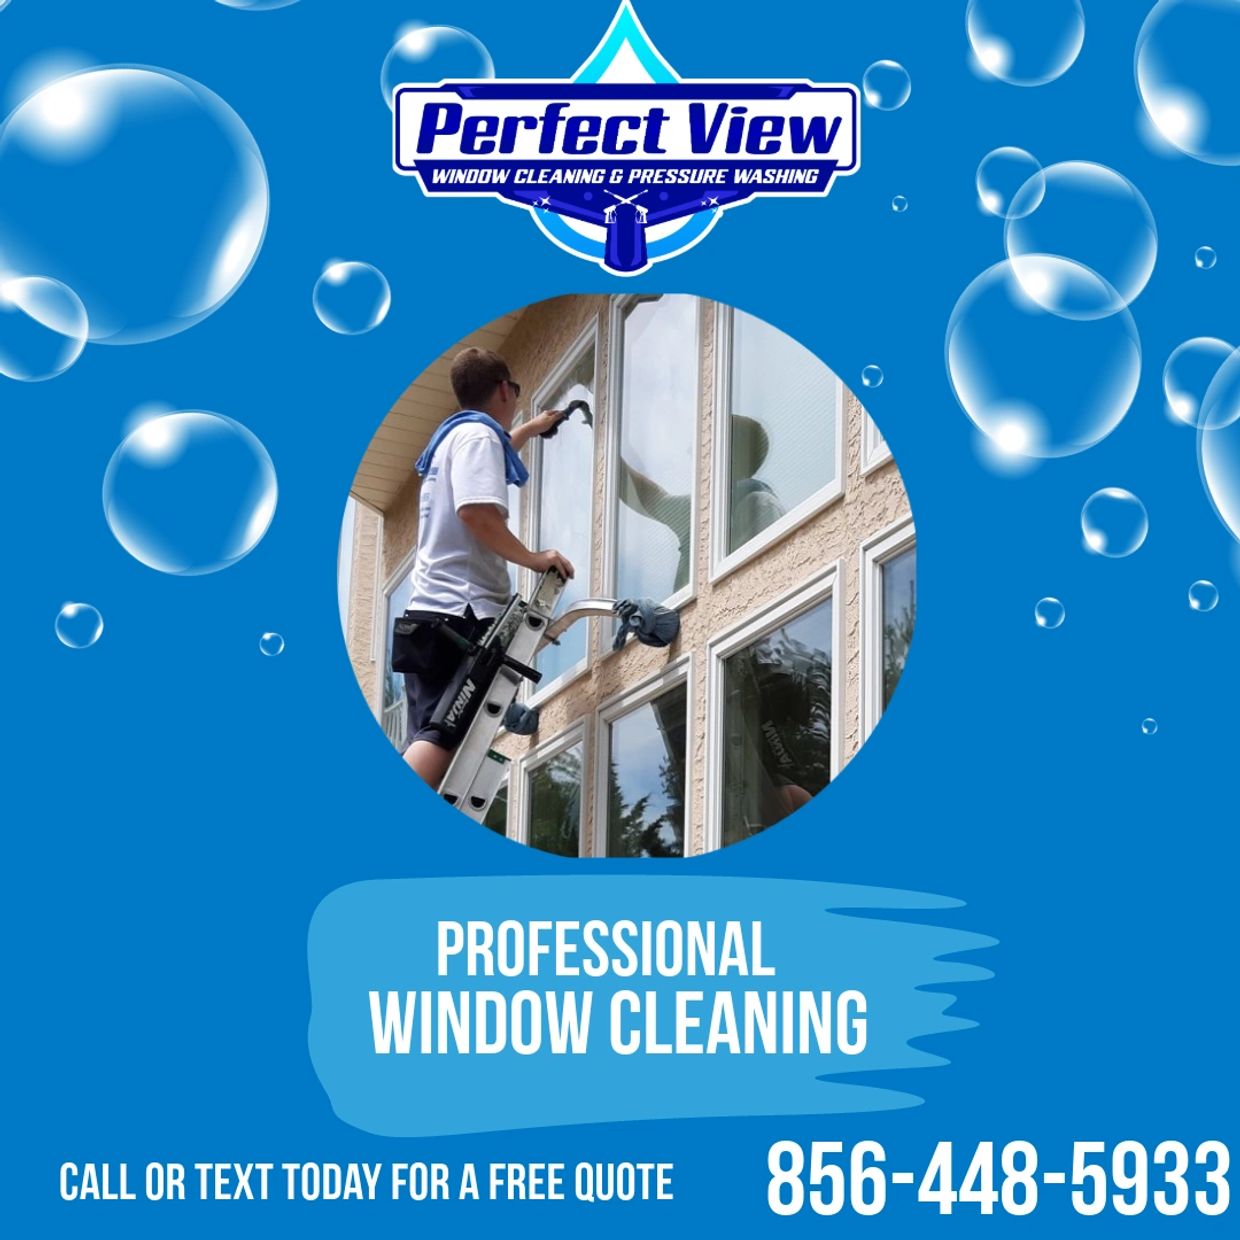 Perfect View Professional Window Cleaning Services South Jersey